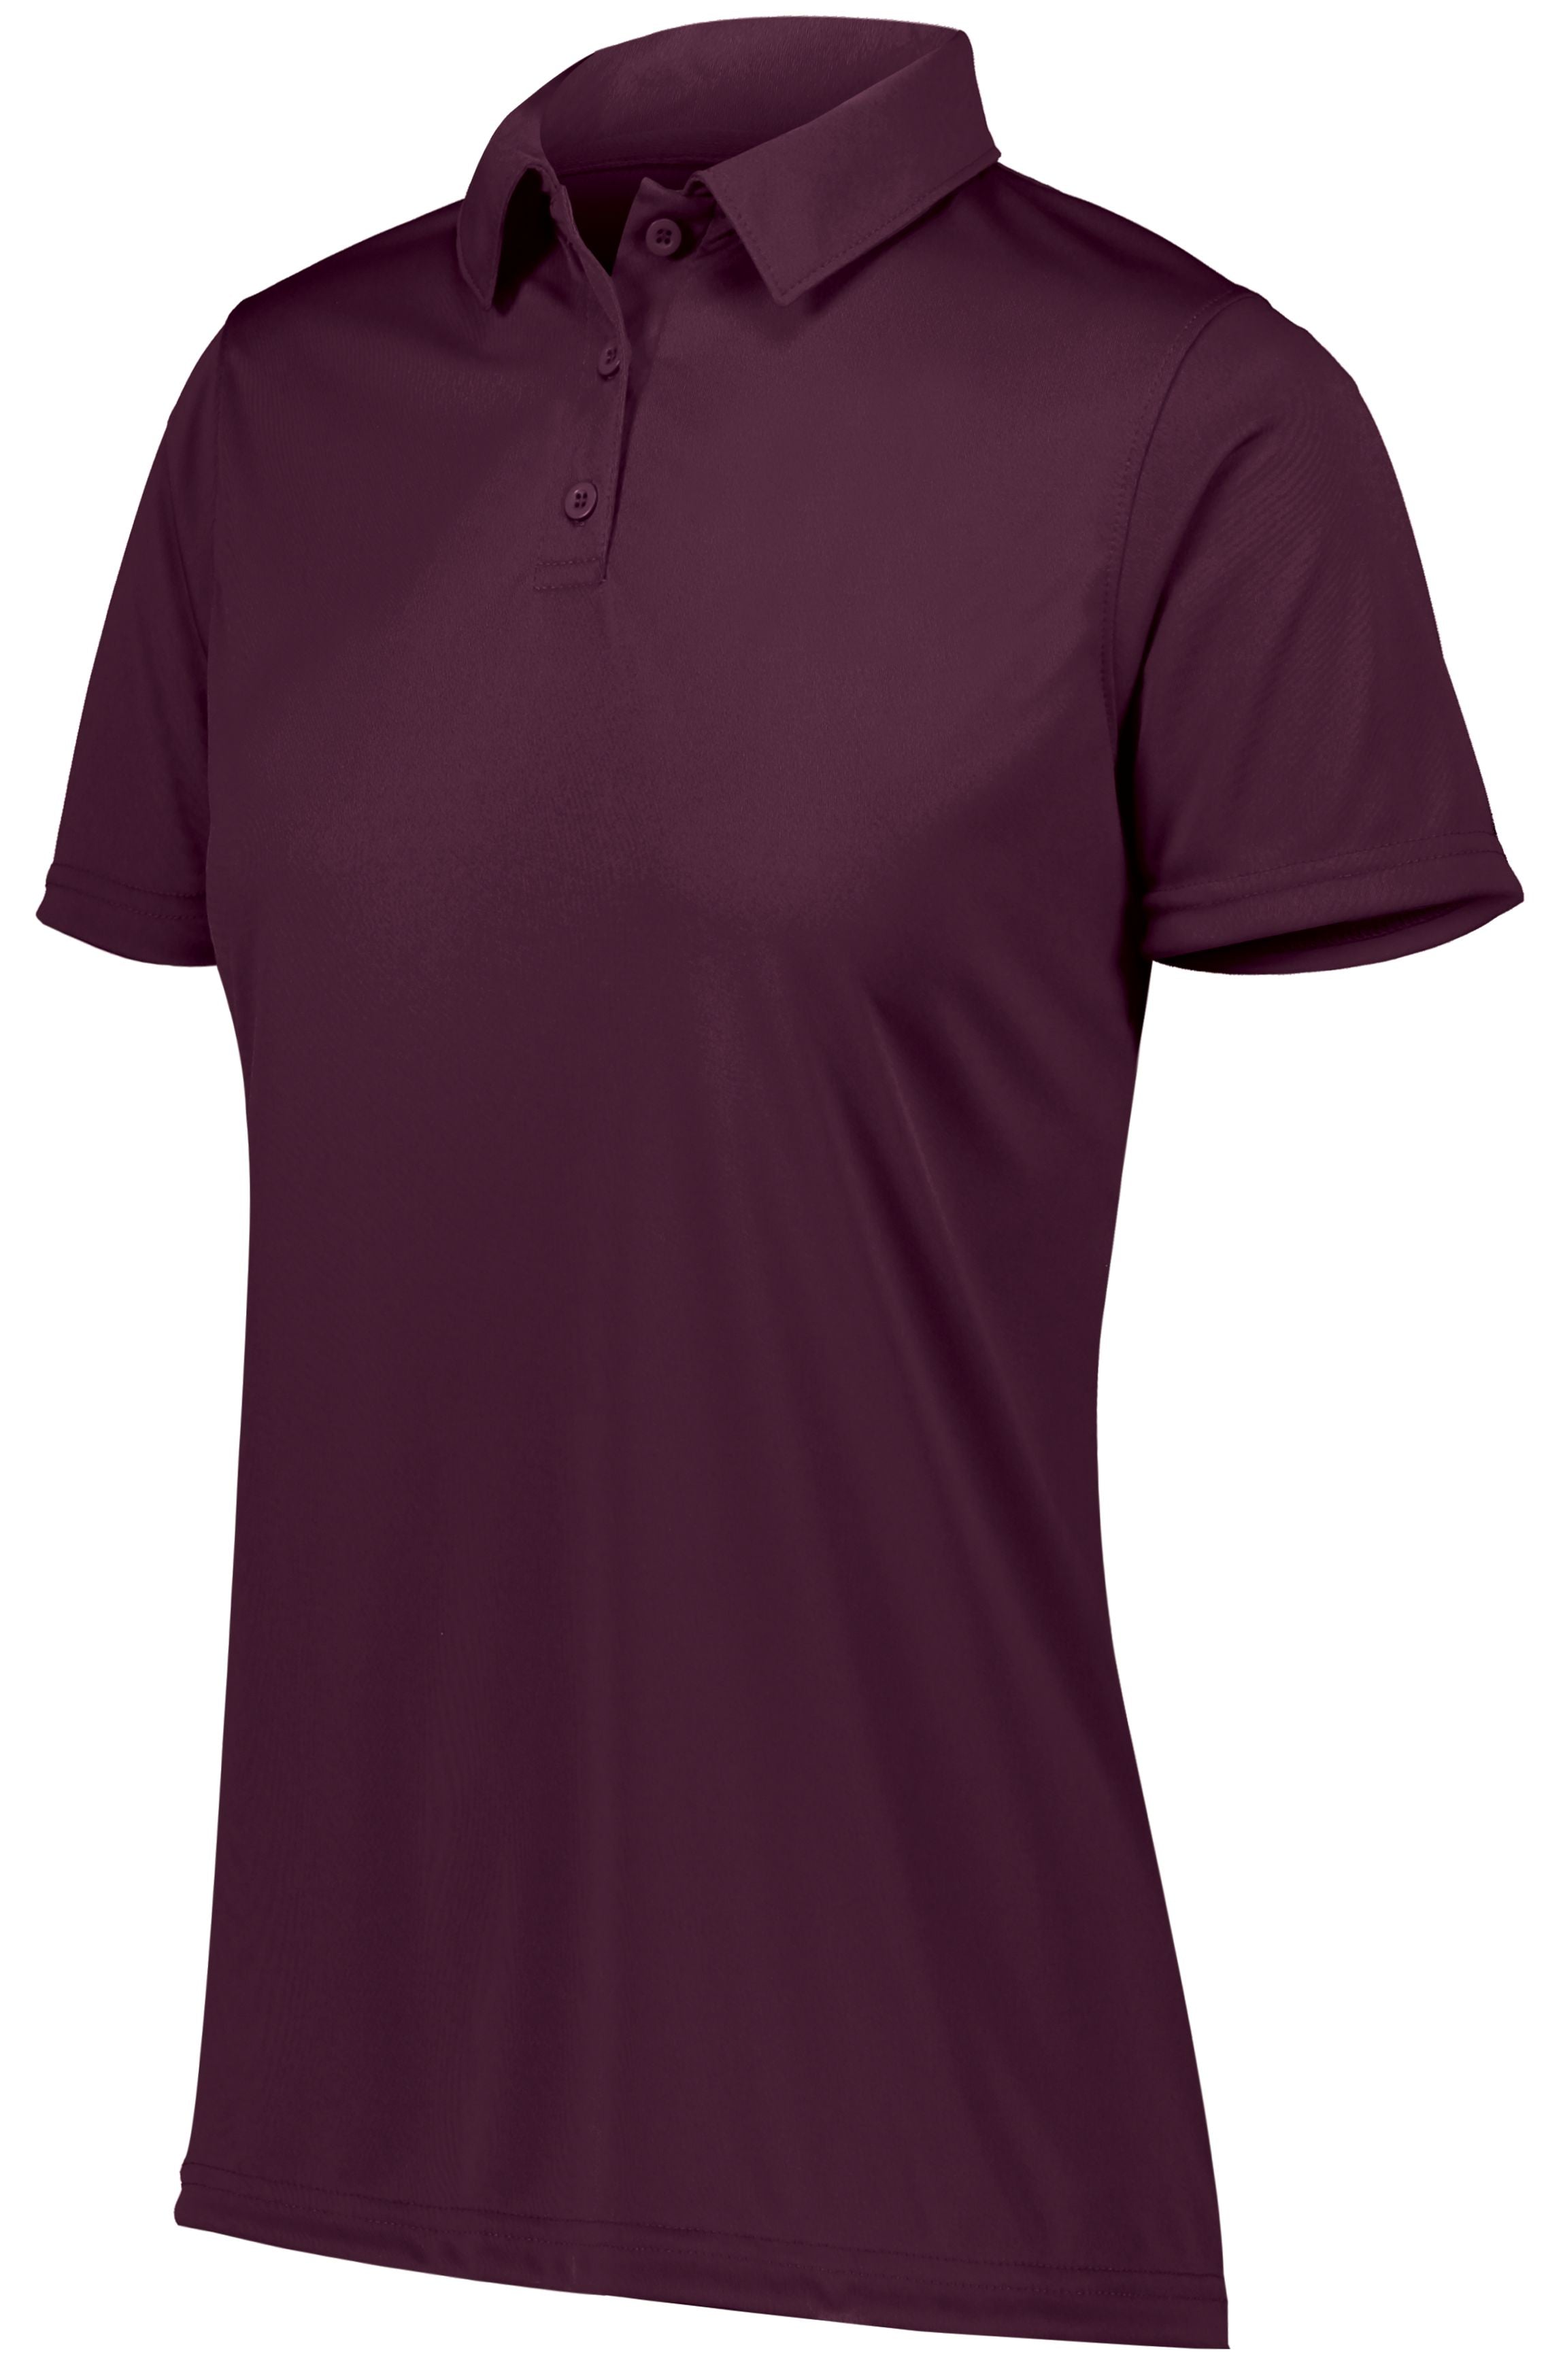 Augusta Sportswear Ladies Vital Polo in Maroon (Hlw)  -Part of the Ladies, Ladies-Polo, Polos, Augusta-Products, Shirts product lines at KanaleyCreations.com